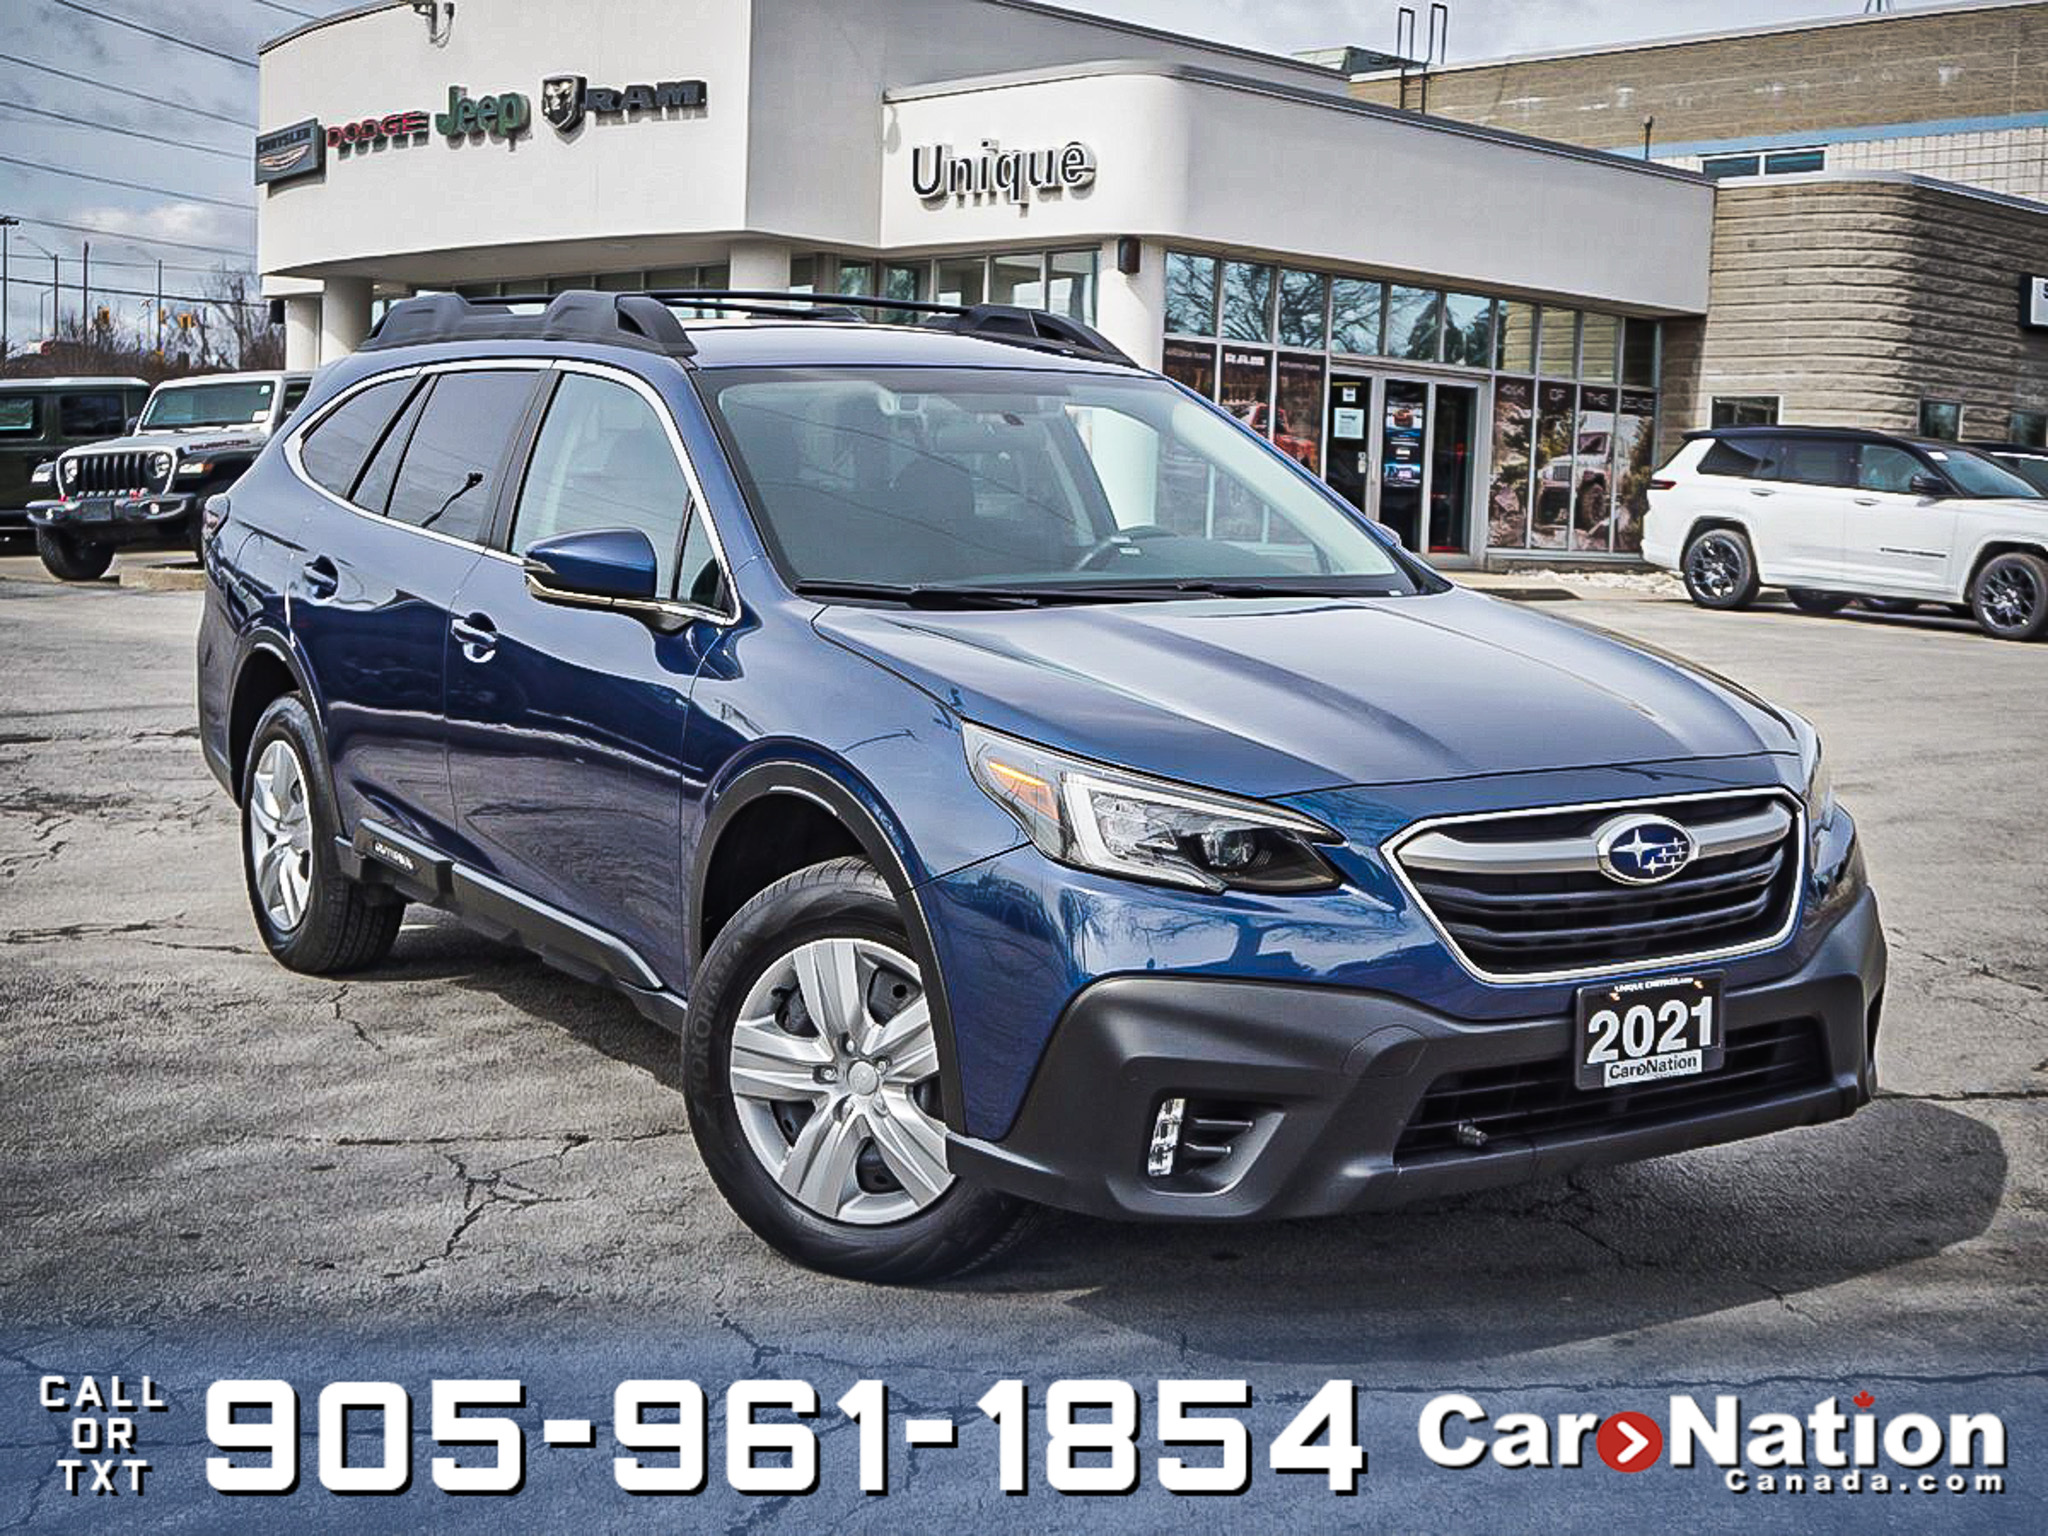 2021 Subaru Outback 2.5i Convenience AWD| SOLD| SOLD| SOLD| SOLD| 